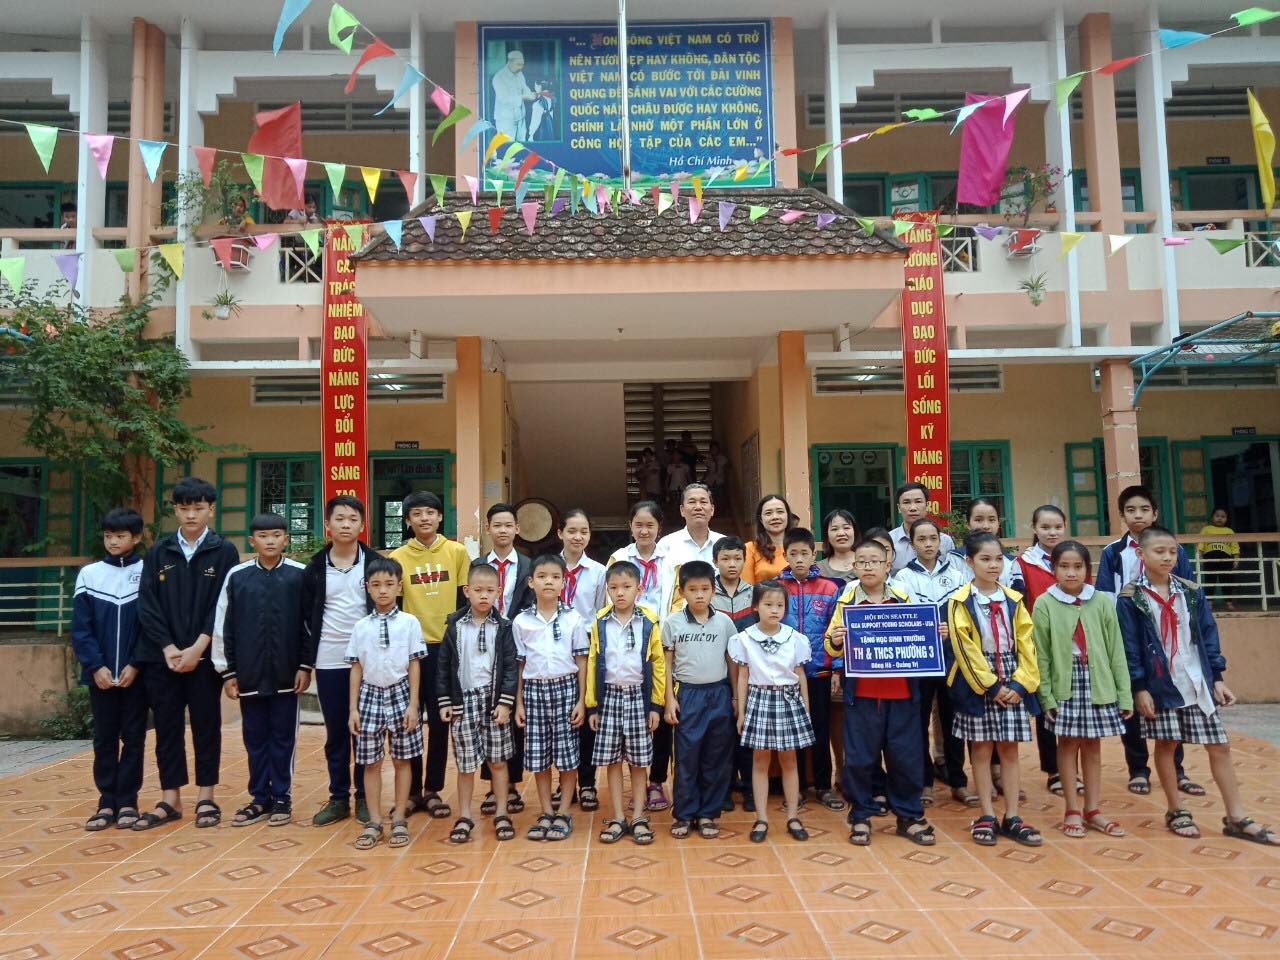 Delivery to Phuong 3 Elementary and Middle School